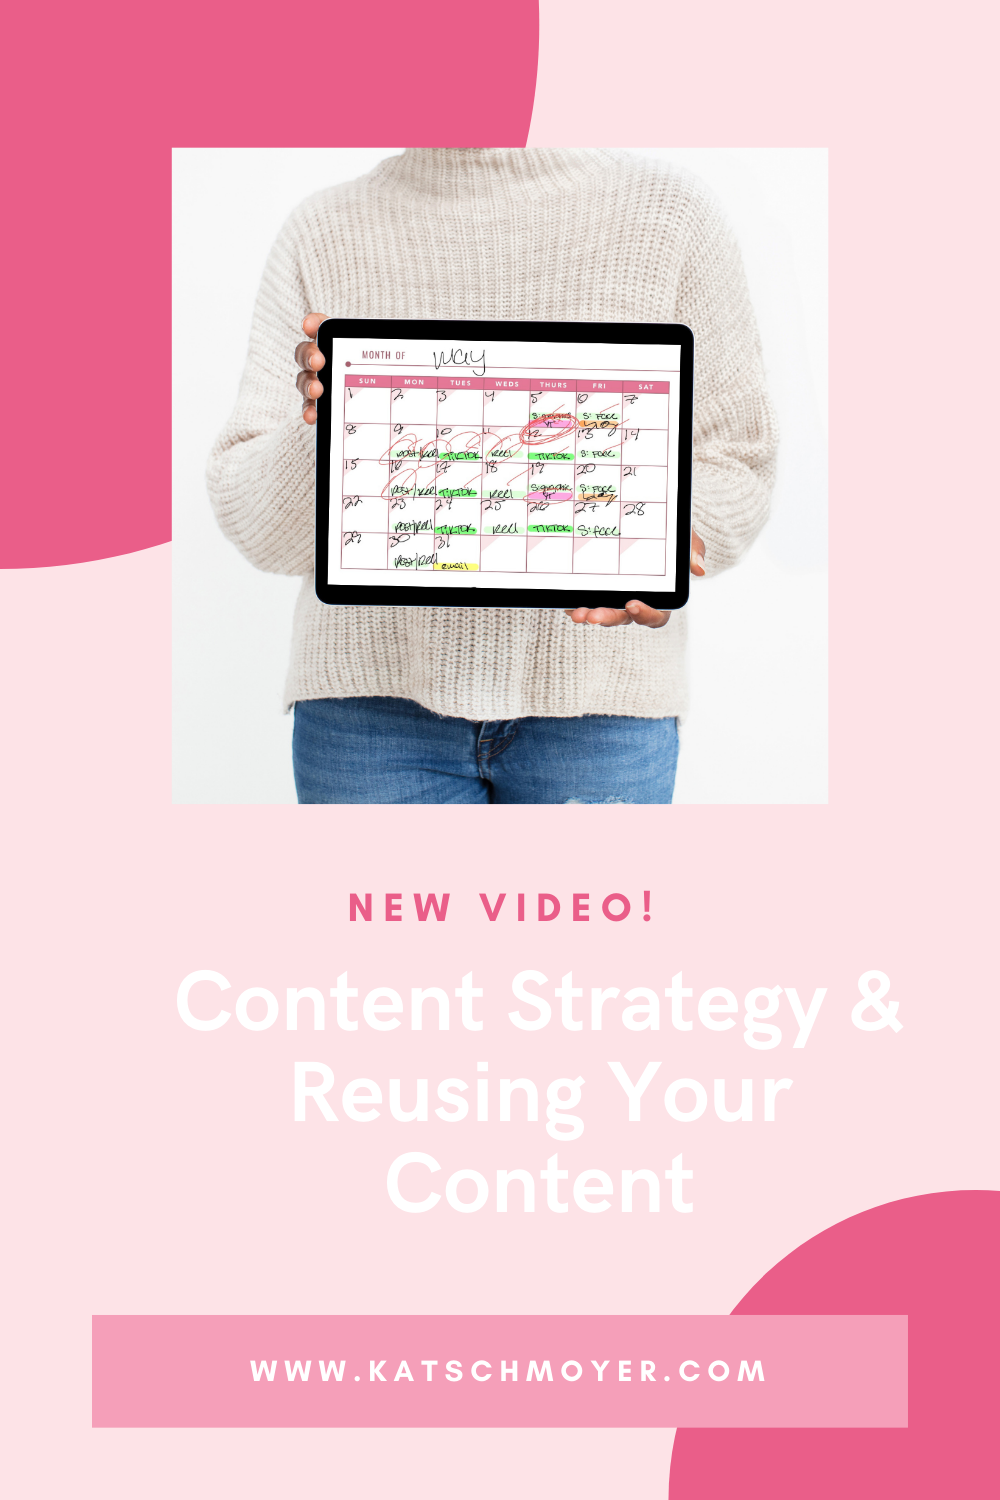 Content Strategy & Reusing Your Content